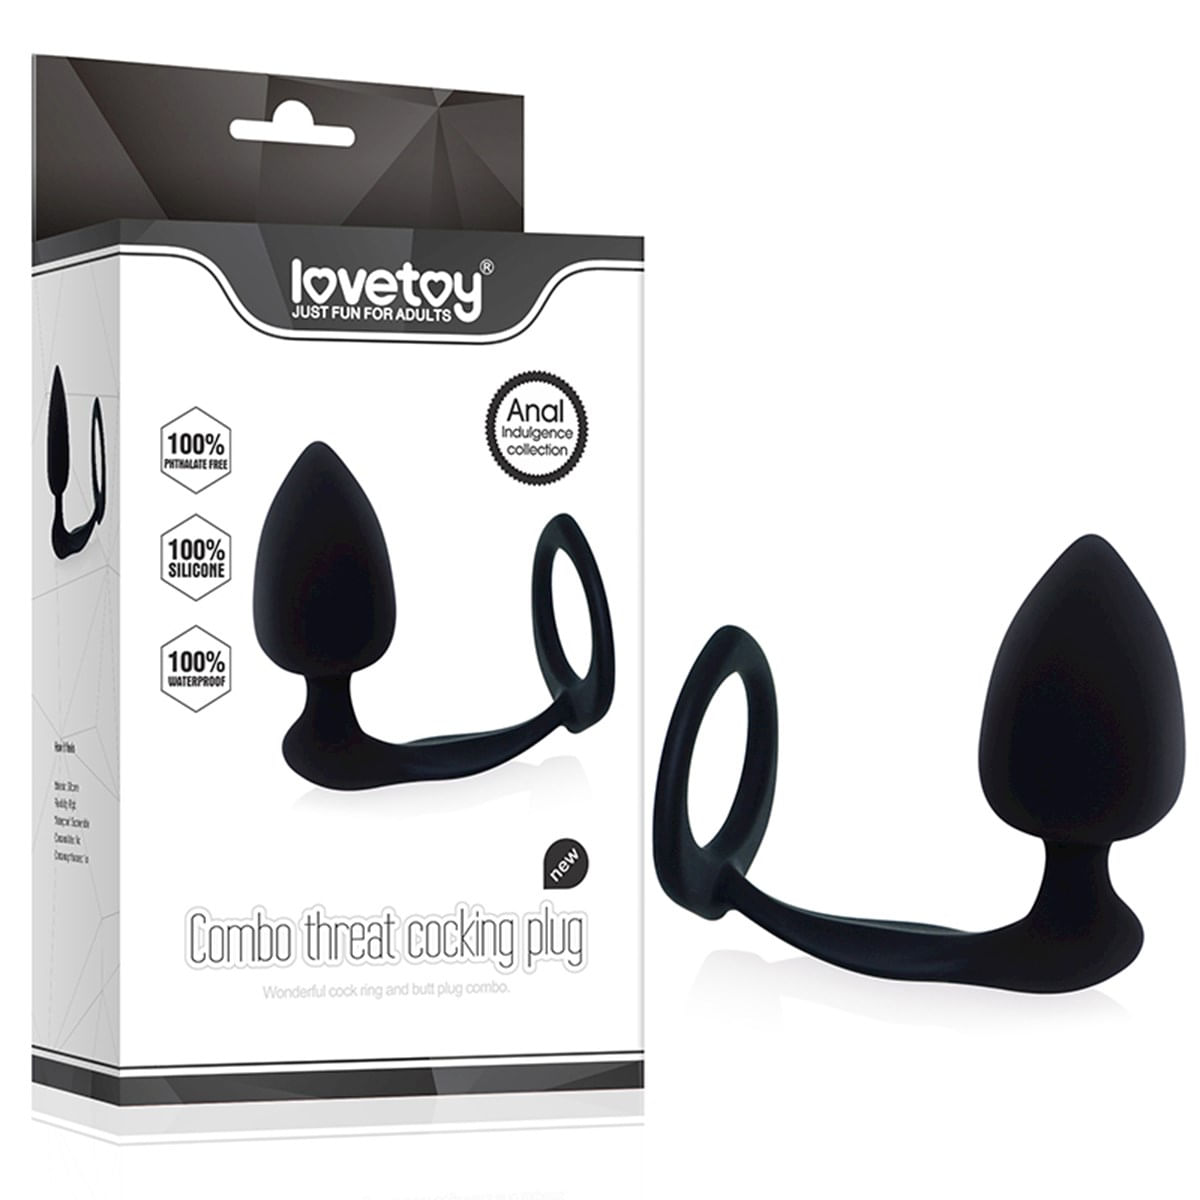 Anel Peniano Com Penetrador Anal Em Silicone Lovetoy Miss Collection